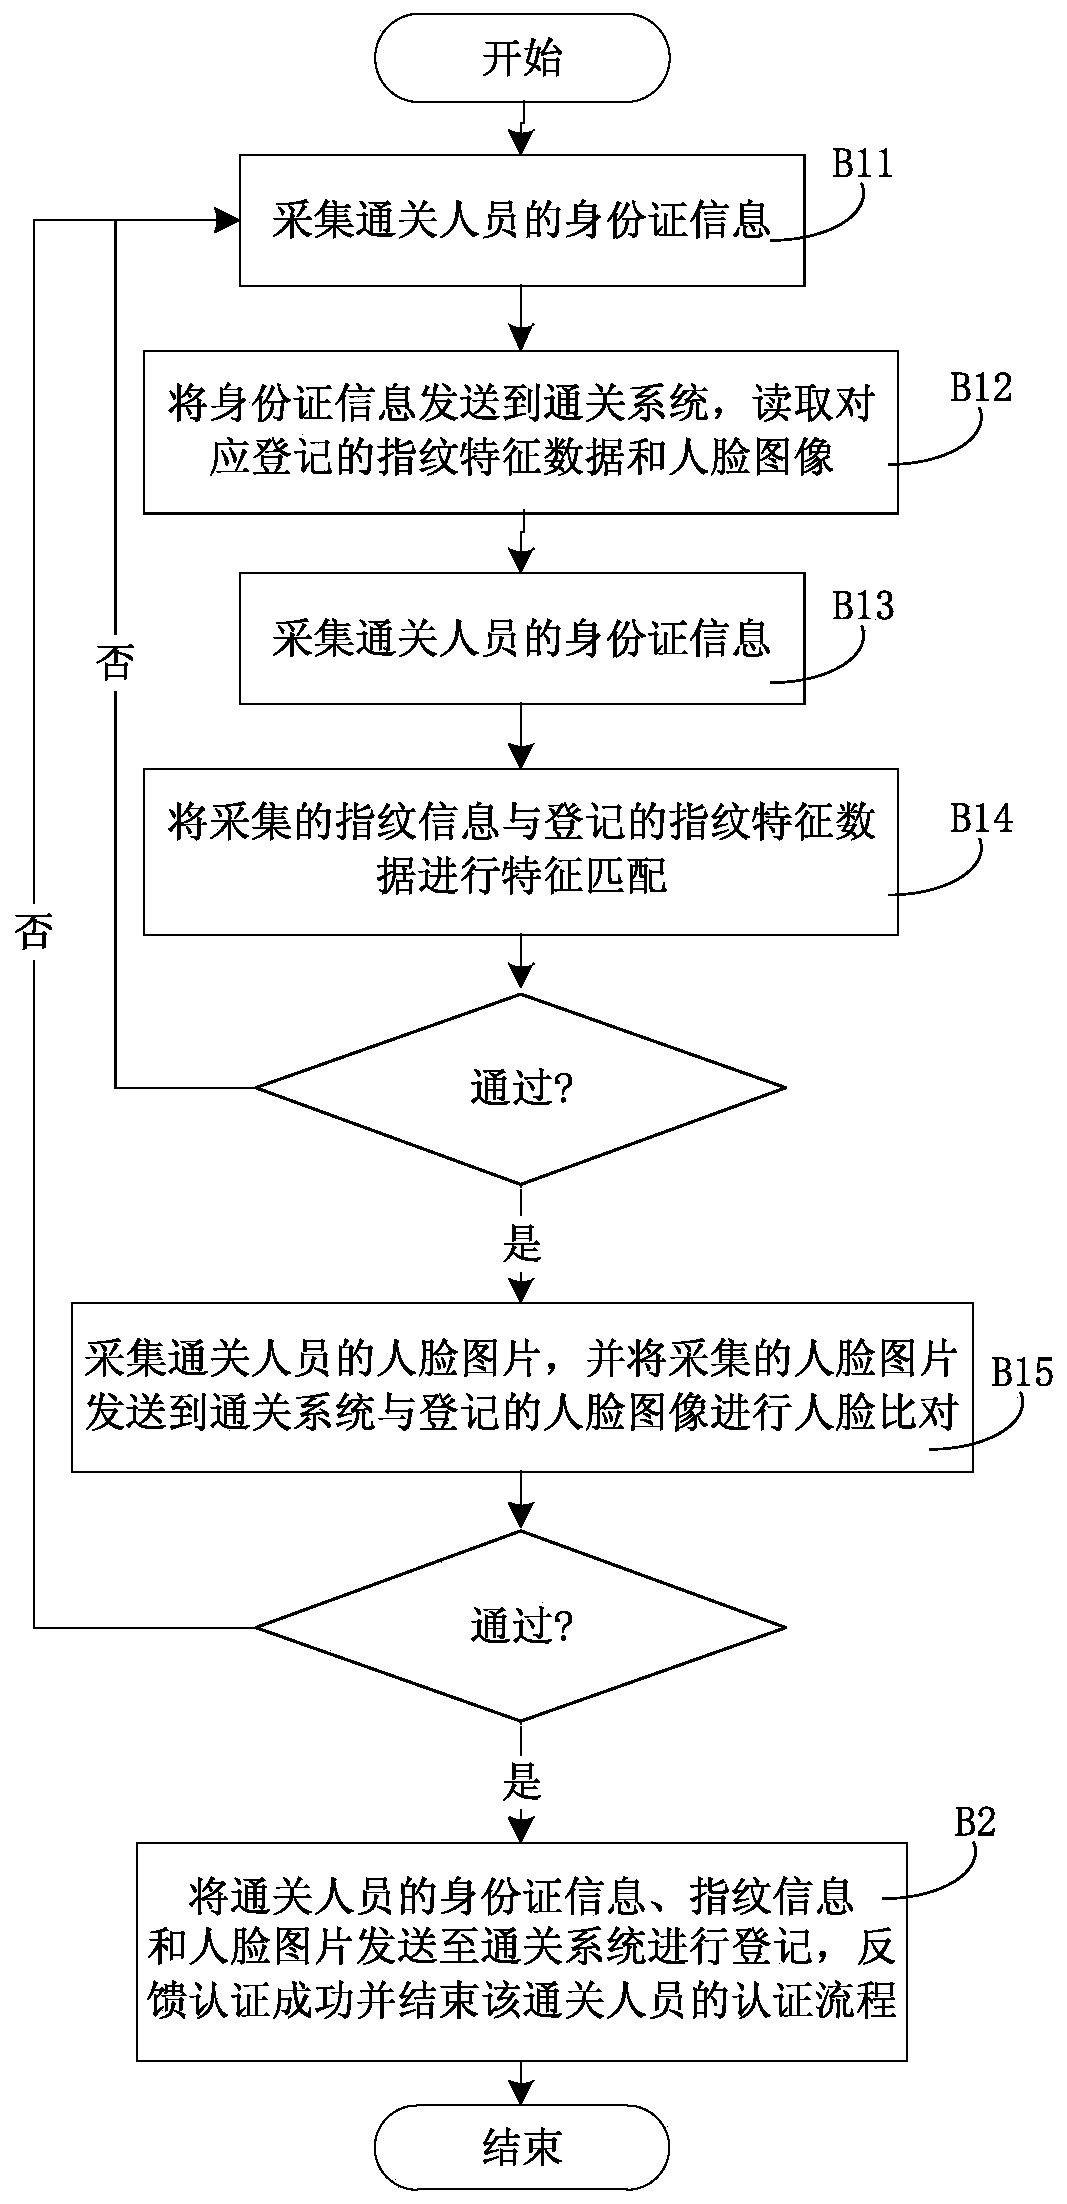 Customs clearance face, fingerprint and identity card automatic authentication system and method